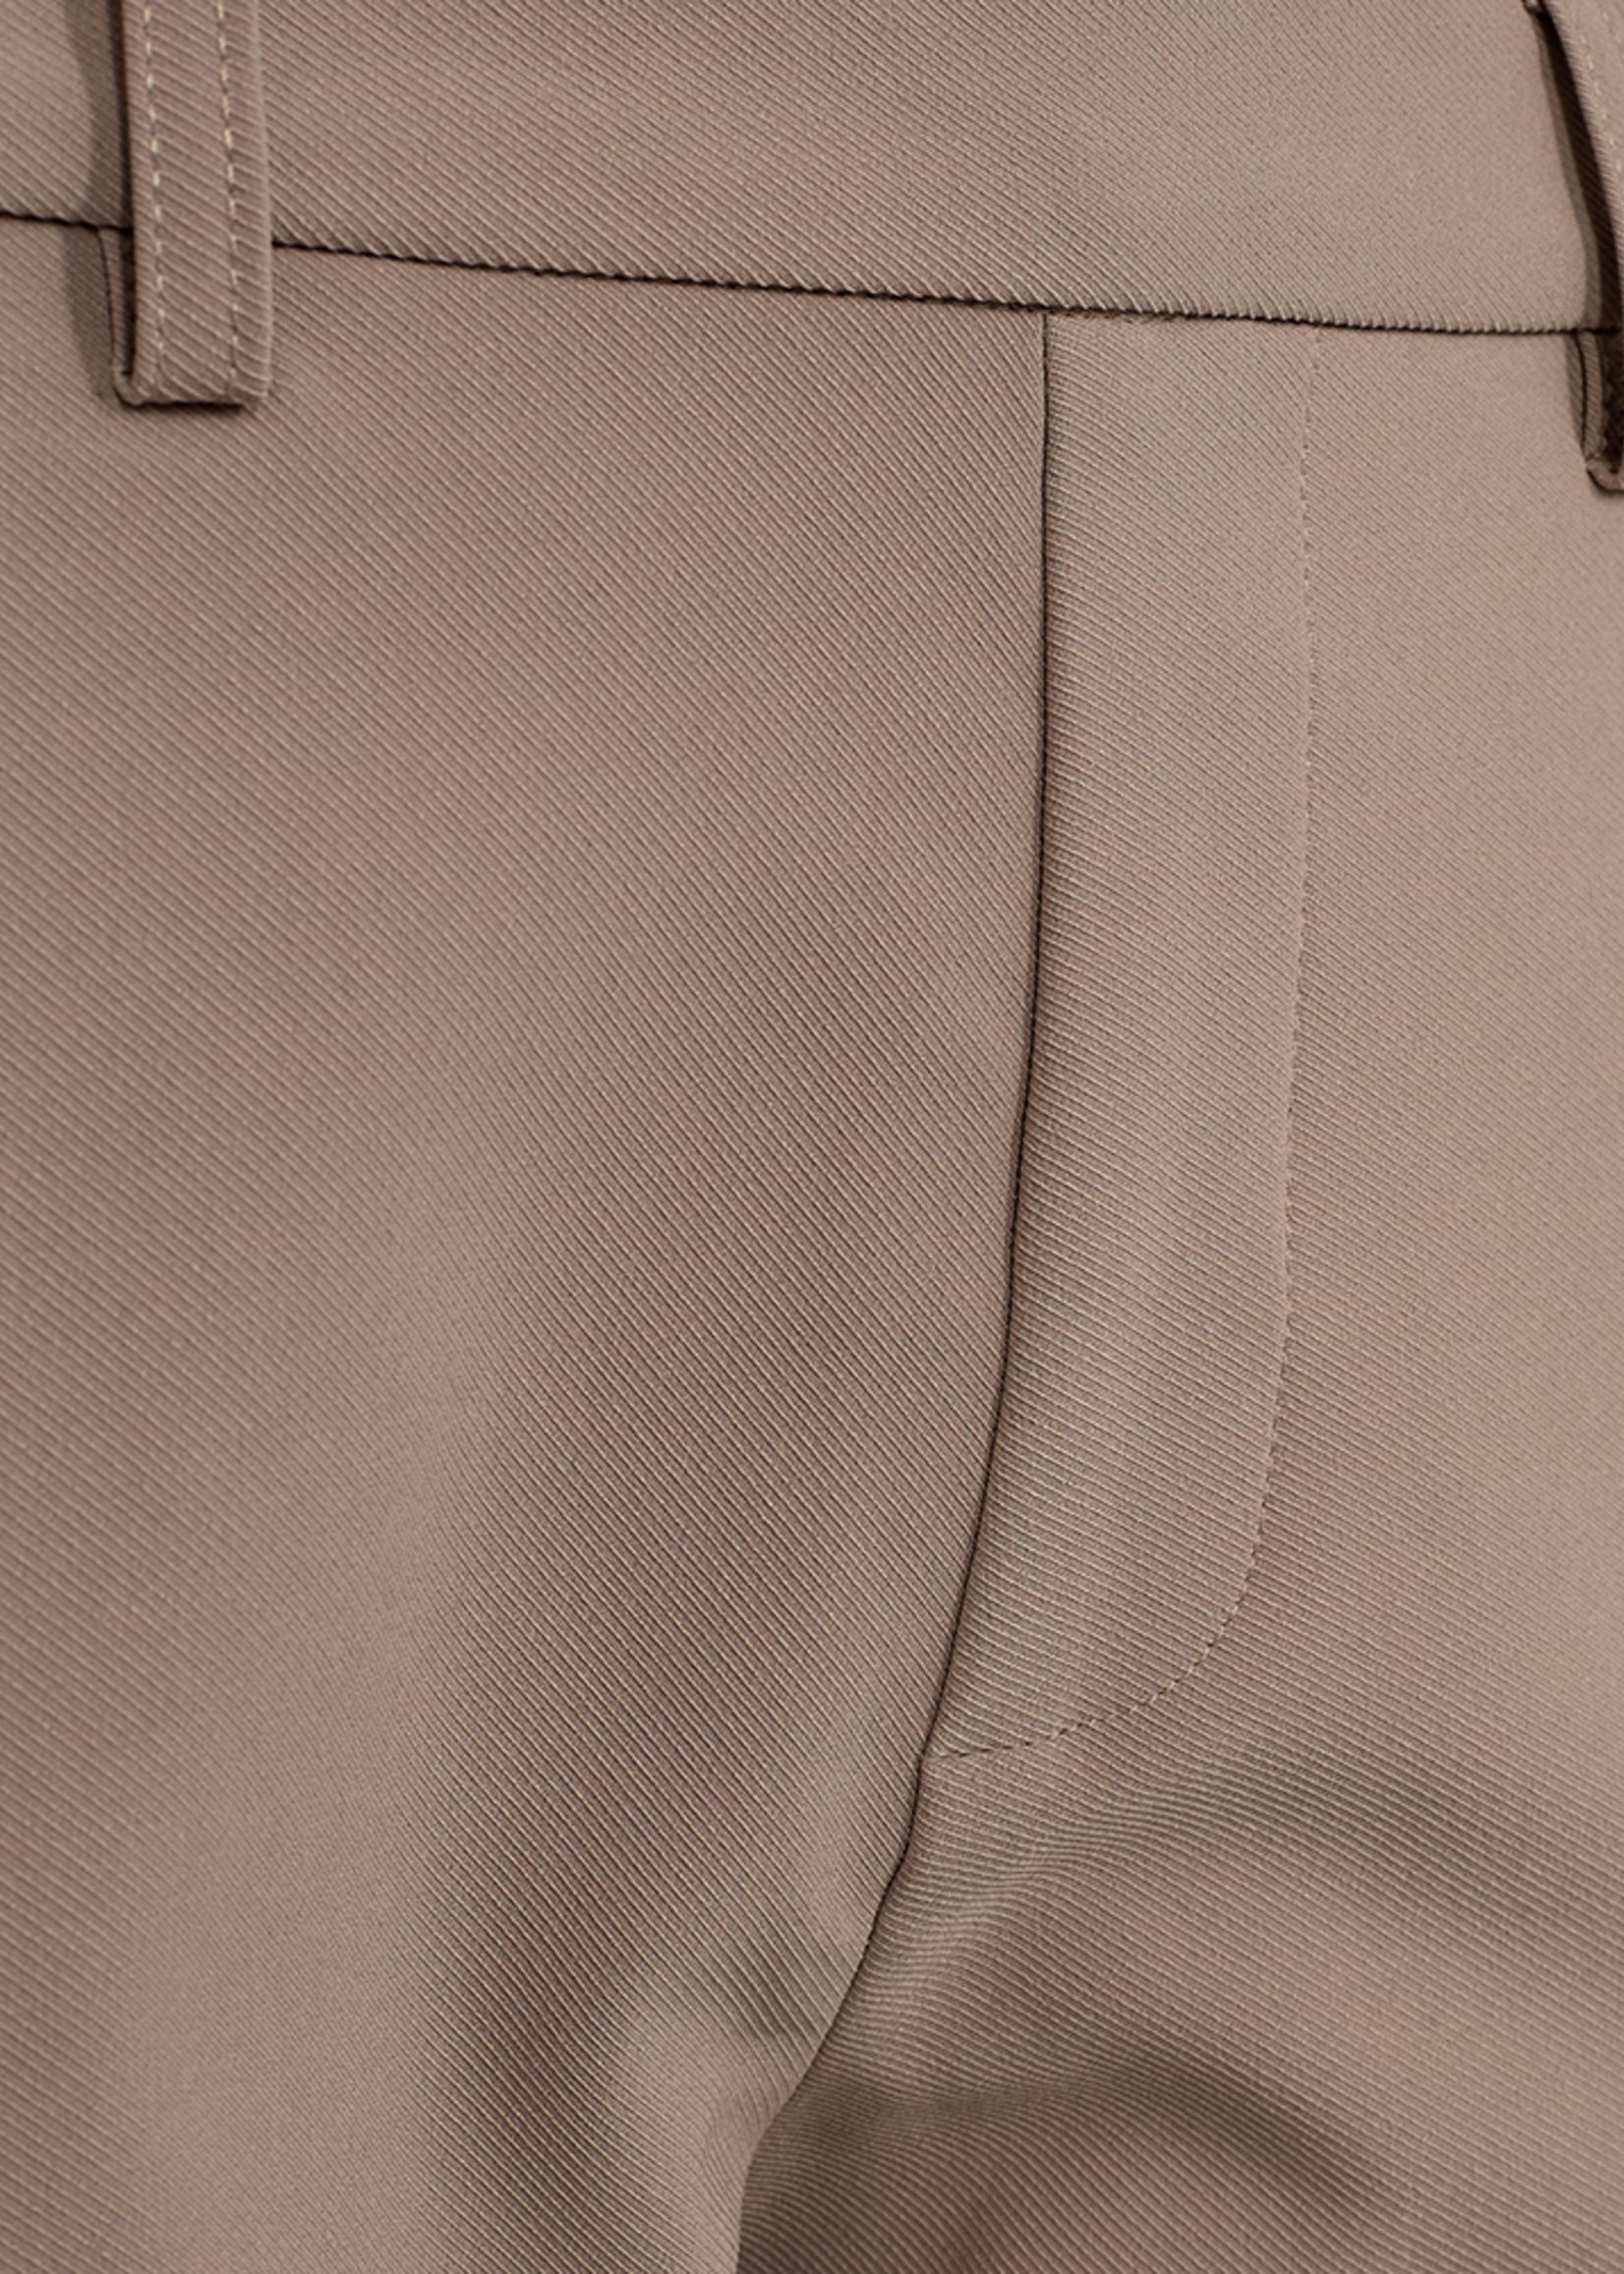 Freequent Broek Rodea - Taupe Grey